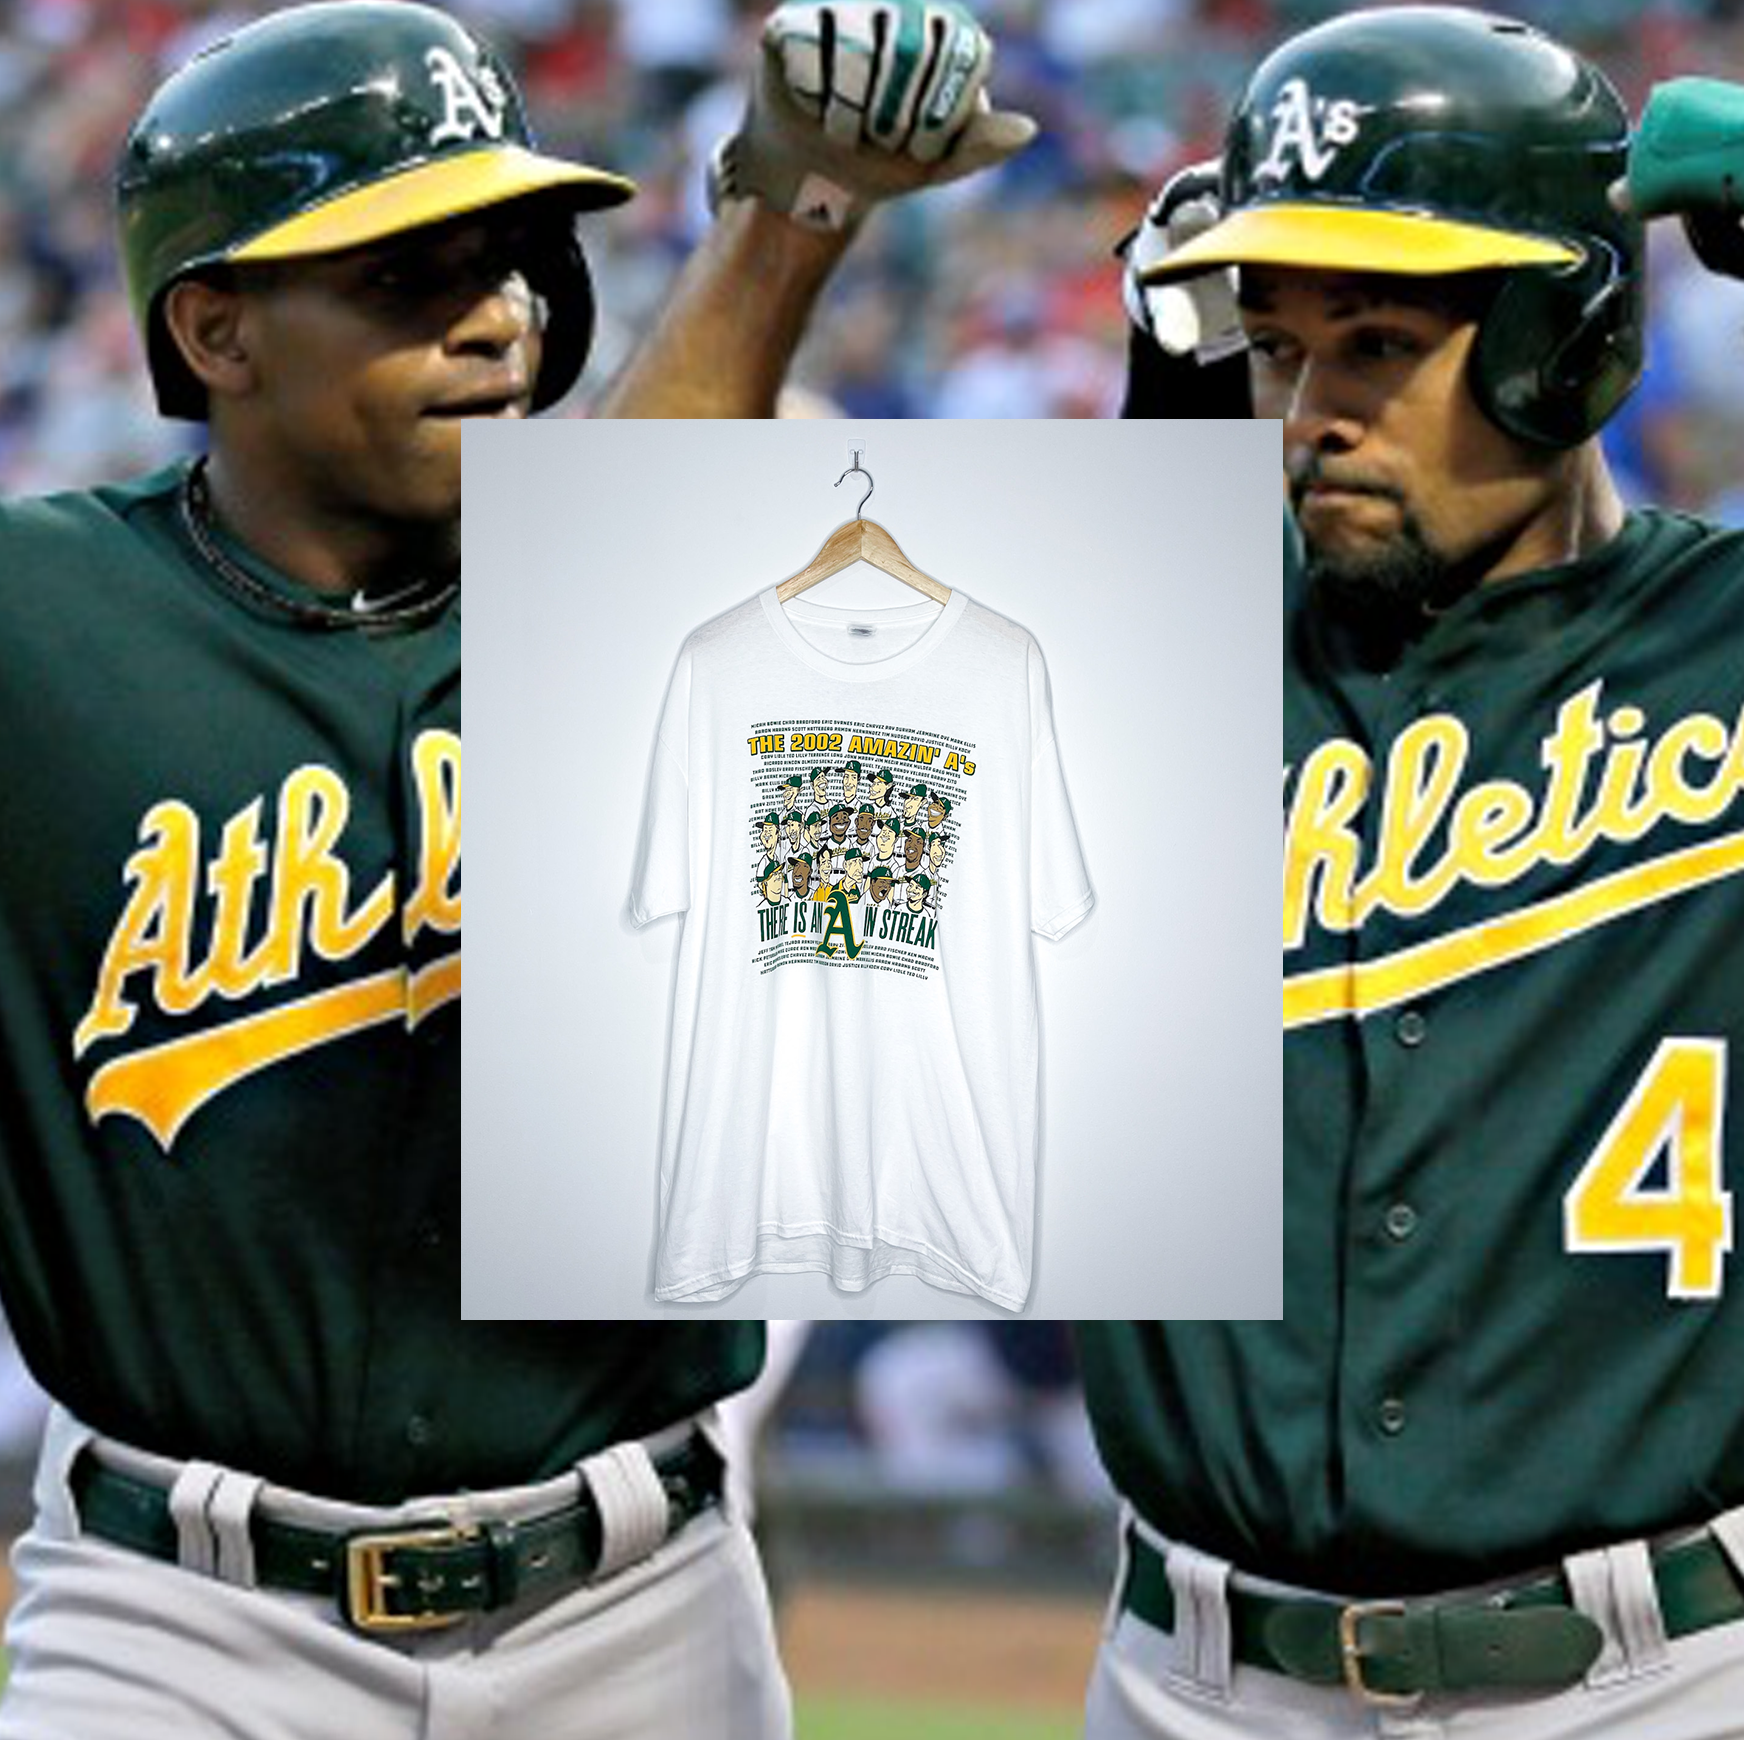 OAKLAND ATHLETICS "The 2002 Amazin' A's" CARICTURE TEE